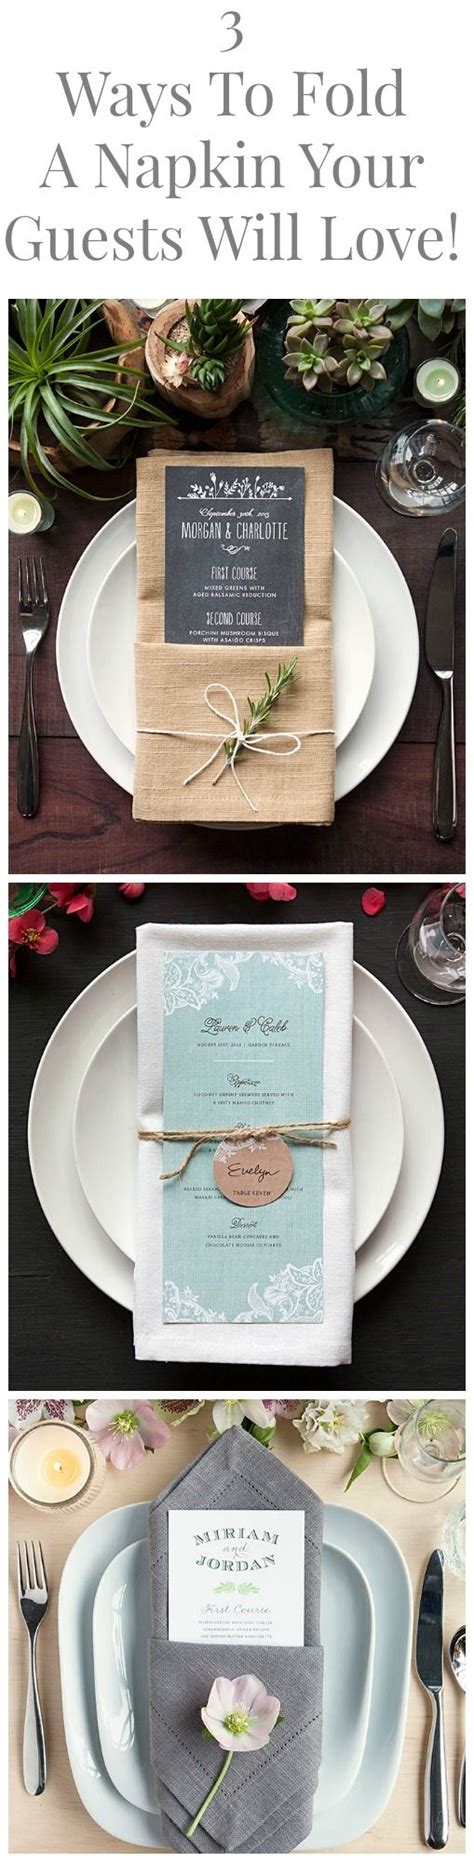 Sure, napkin folding is an art. Napkins, Wedding tables and Dinner parties on Pinterest